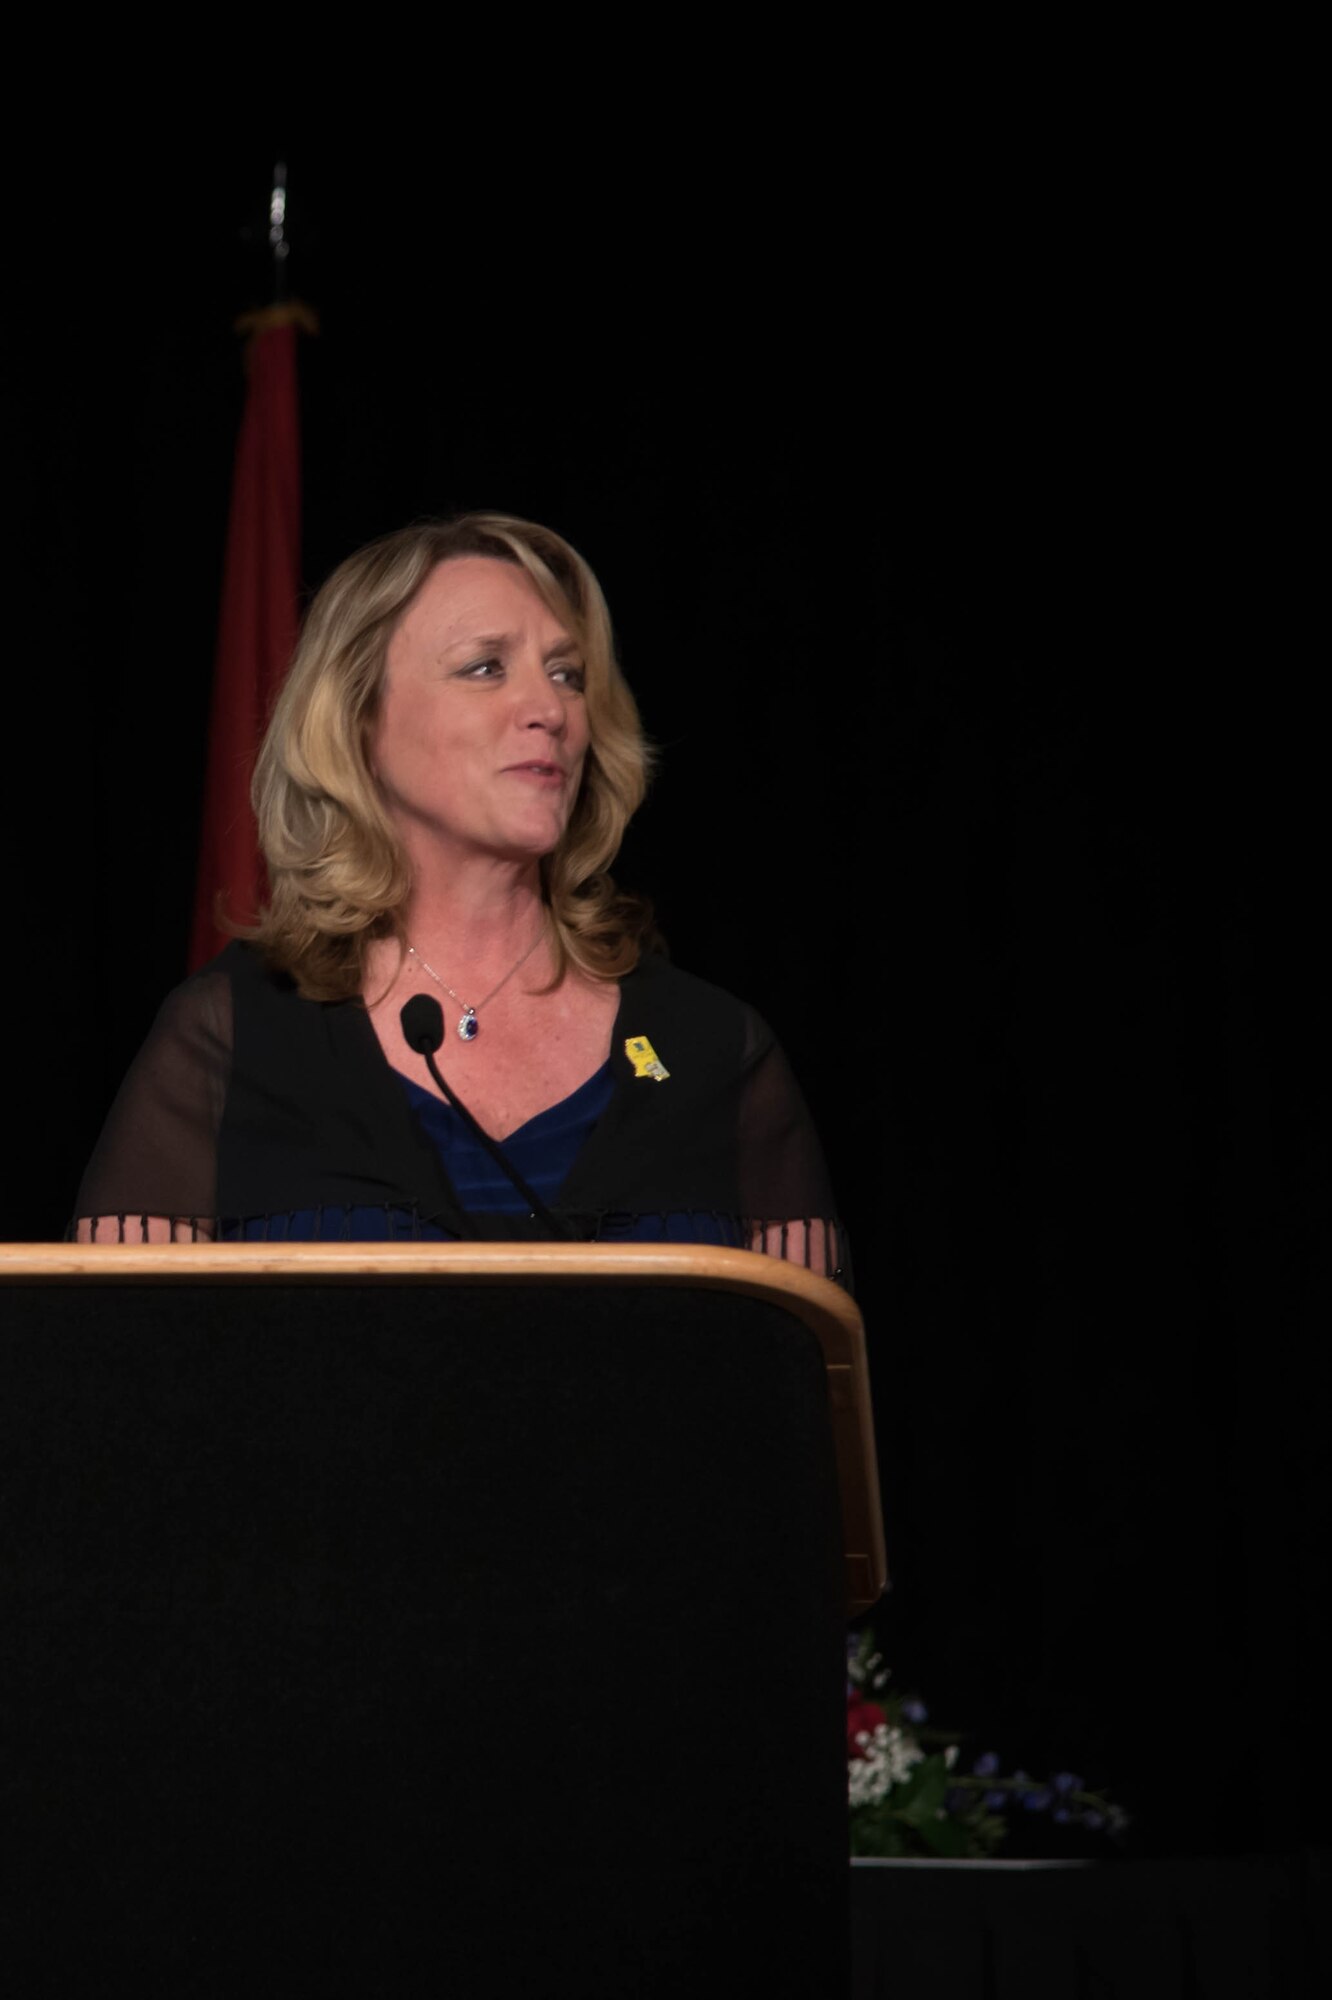 Secretary of the Air Force Deborah Lee James speaks to
more than 1,000 Gulf Coast military and community members during the 38th Annual Salute to the Military event at the Gulf Coast Convention Center in Biloxi Miss. Oct. 25. (U.S. Air Force photo/Senior Airman Heather Heiney)